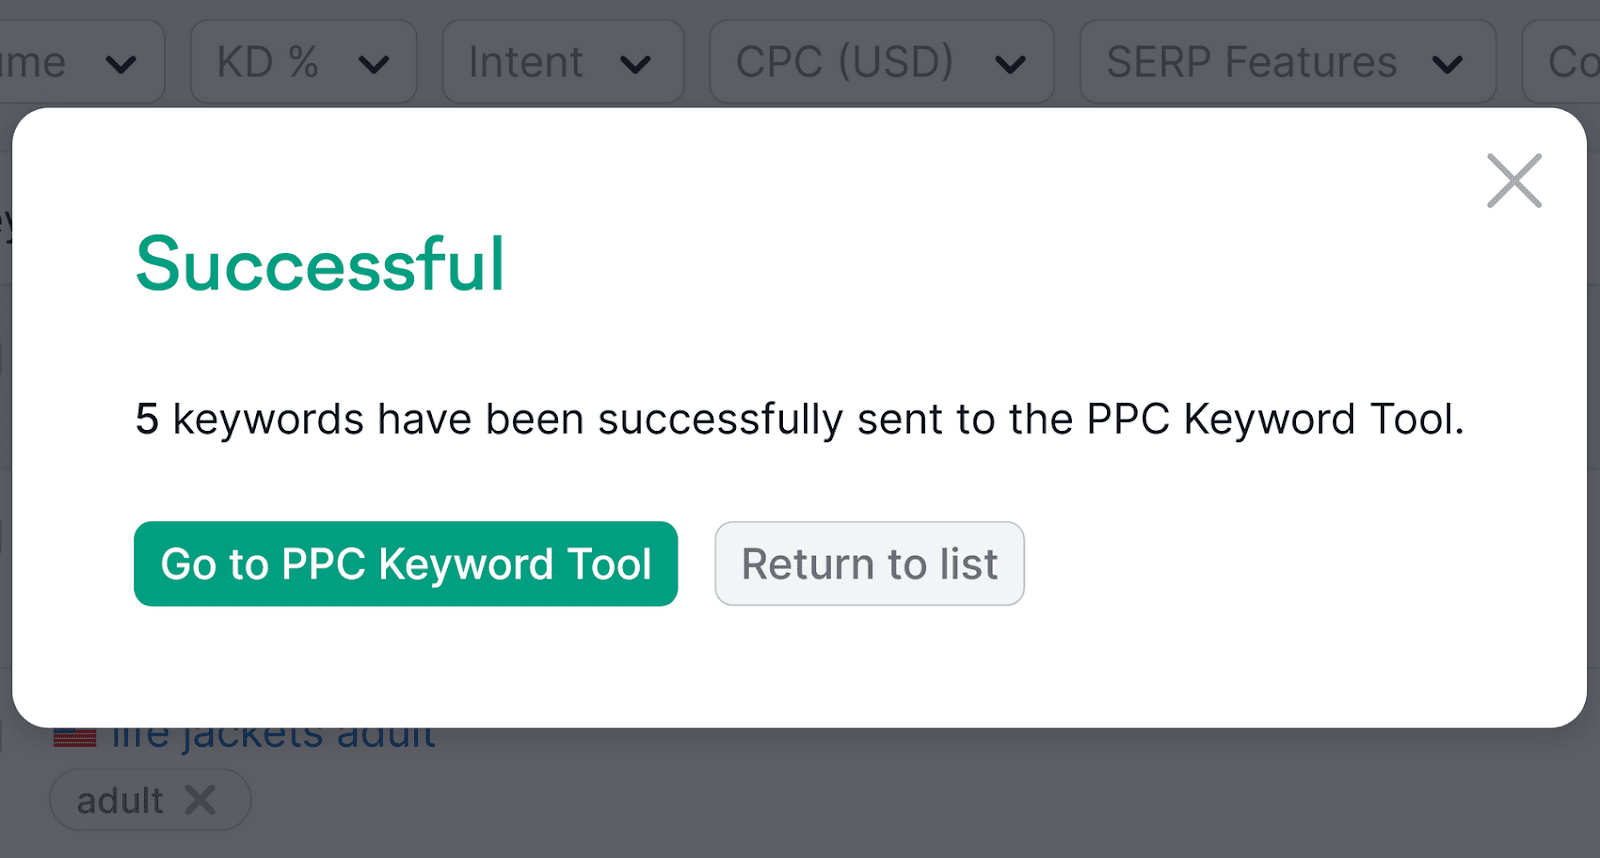 Popup message indicating a successful action with options to go to the PPC Keyword Tool or return to the list.